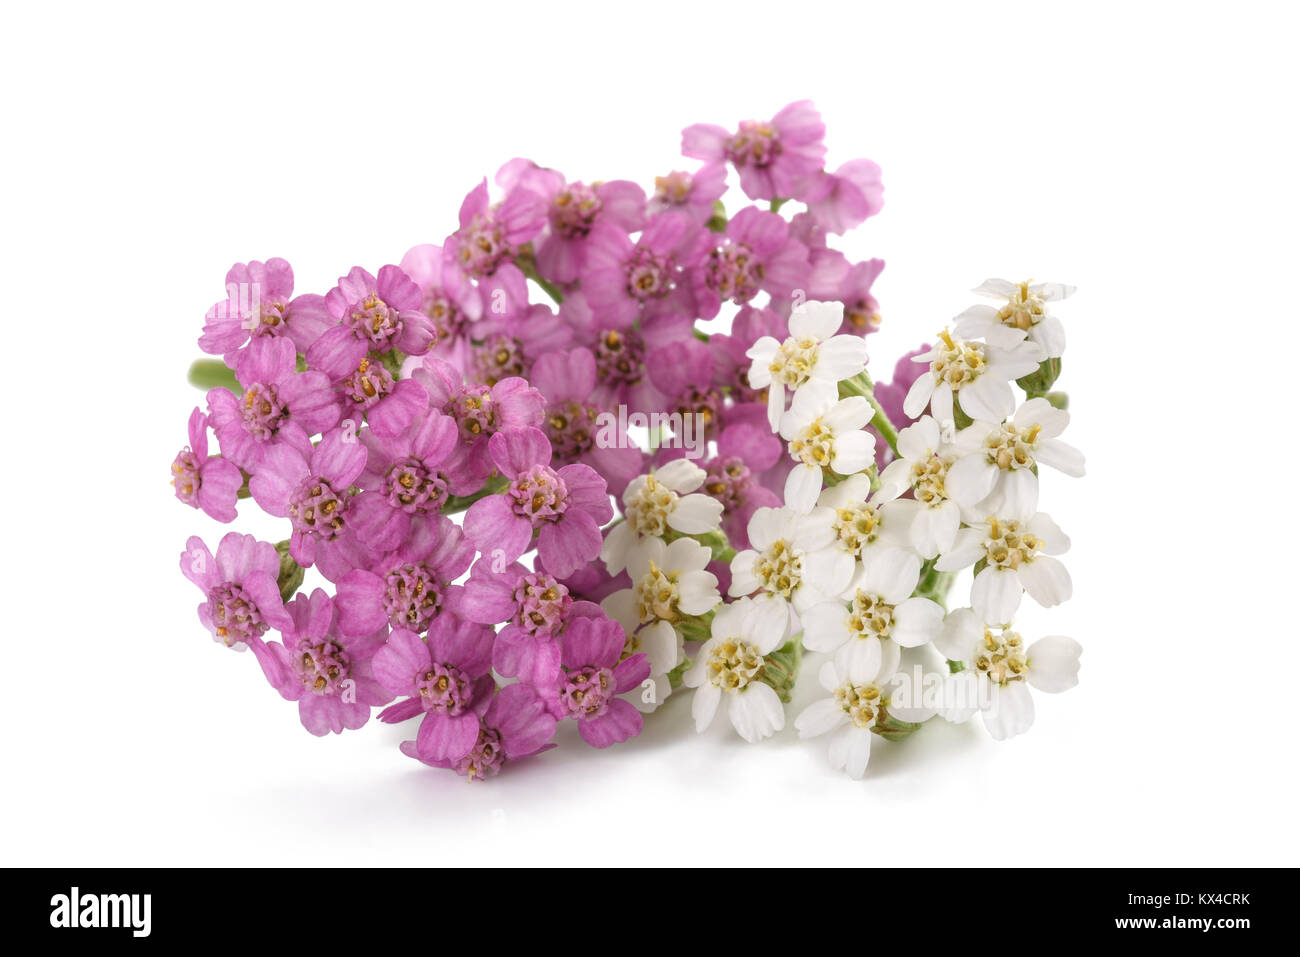 White and pink yarrow flowers isolated on white background. Stock Photo